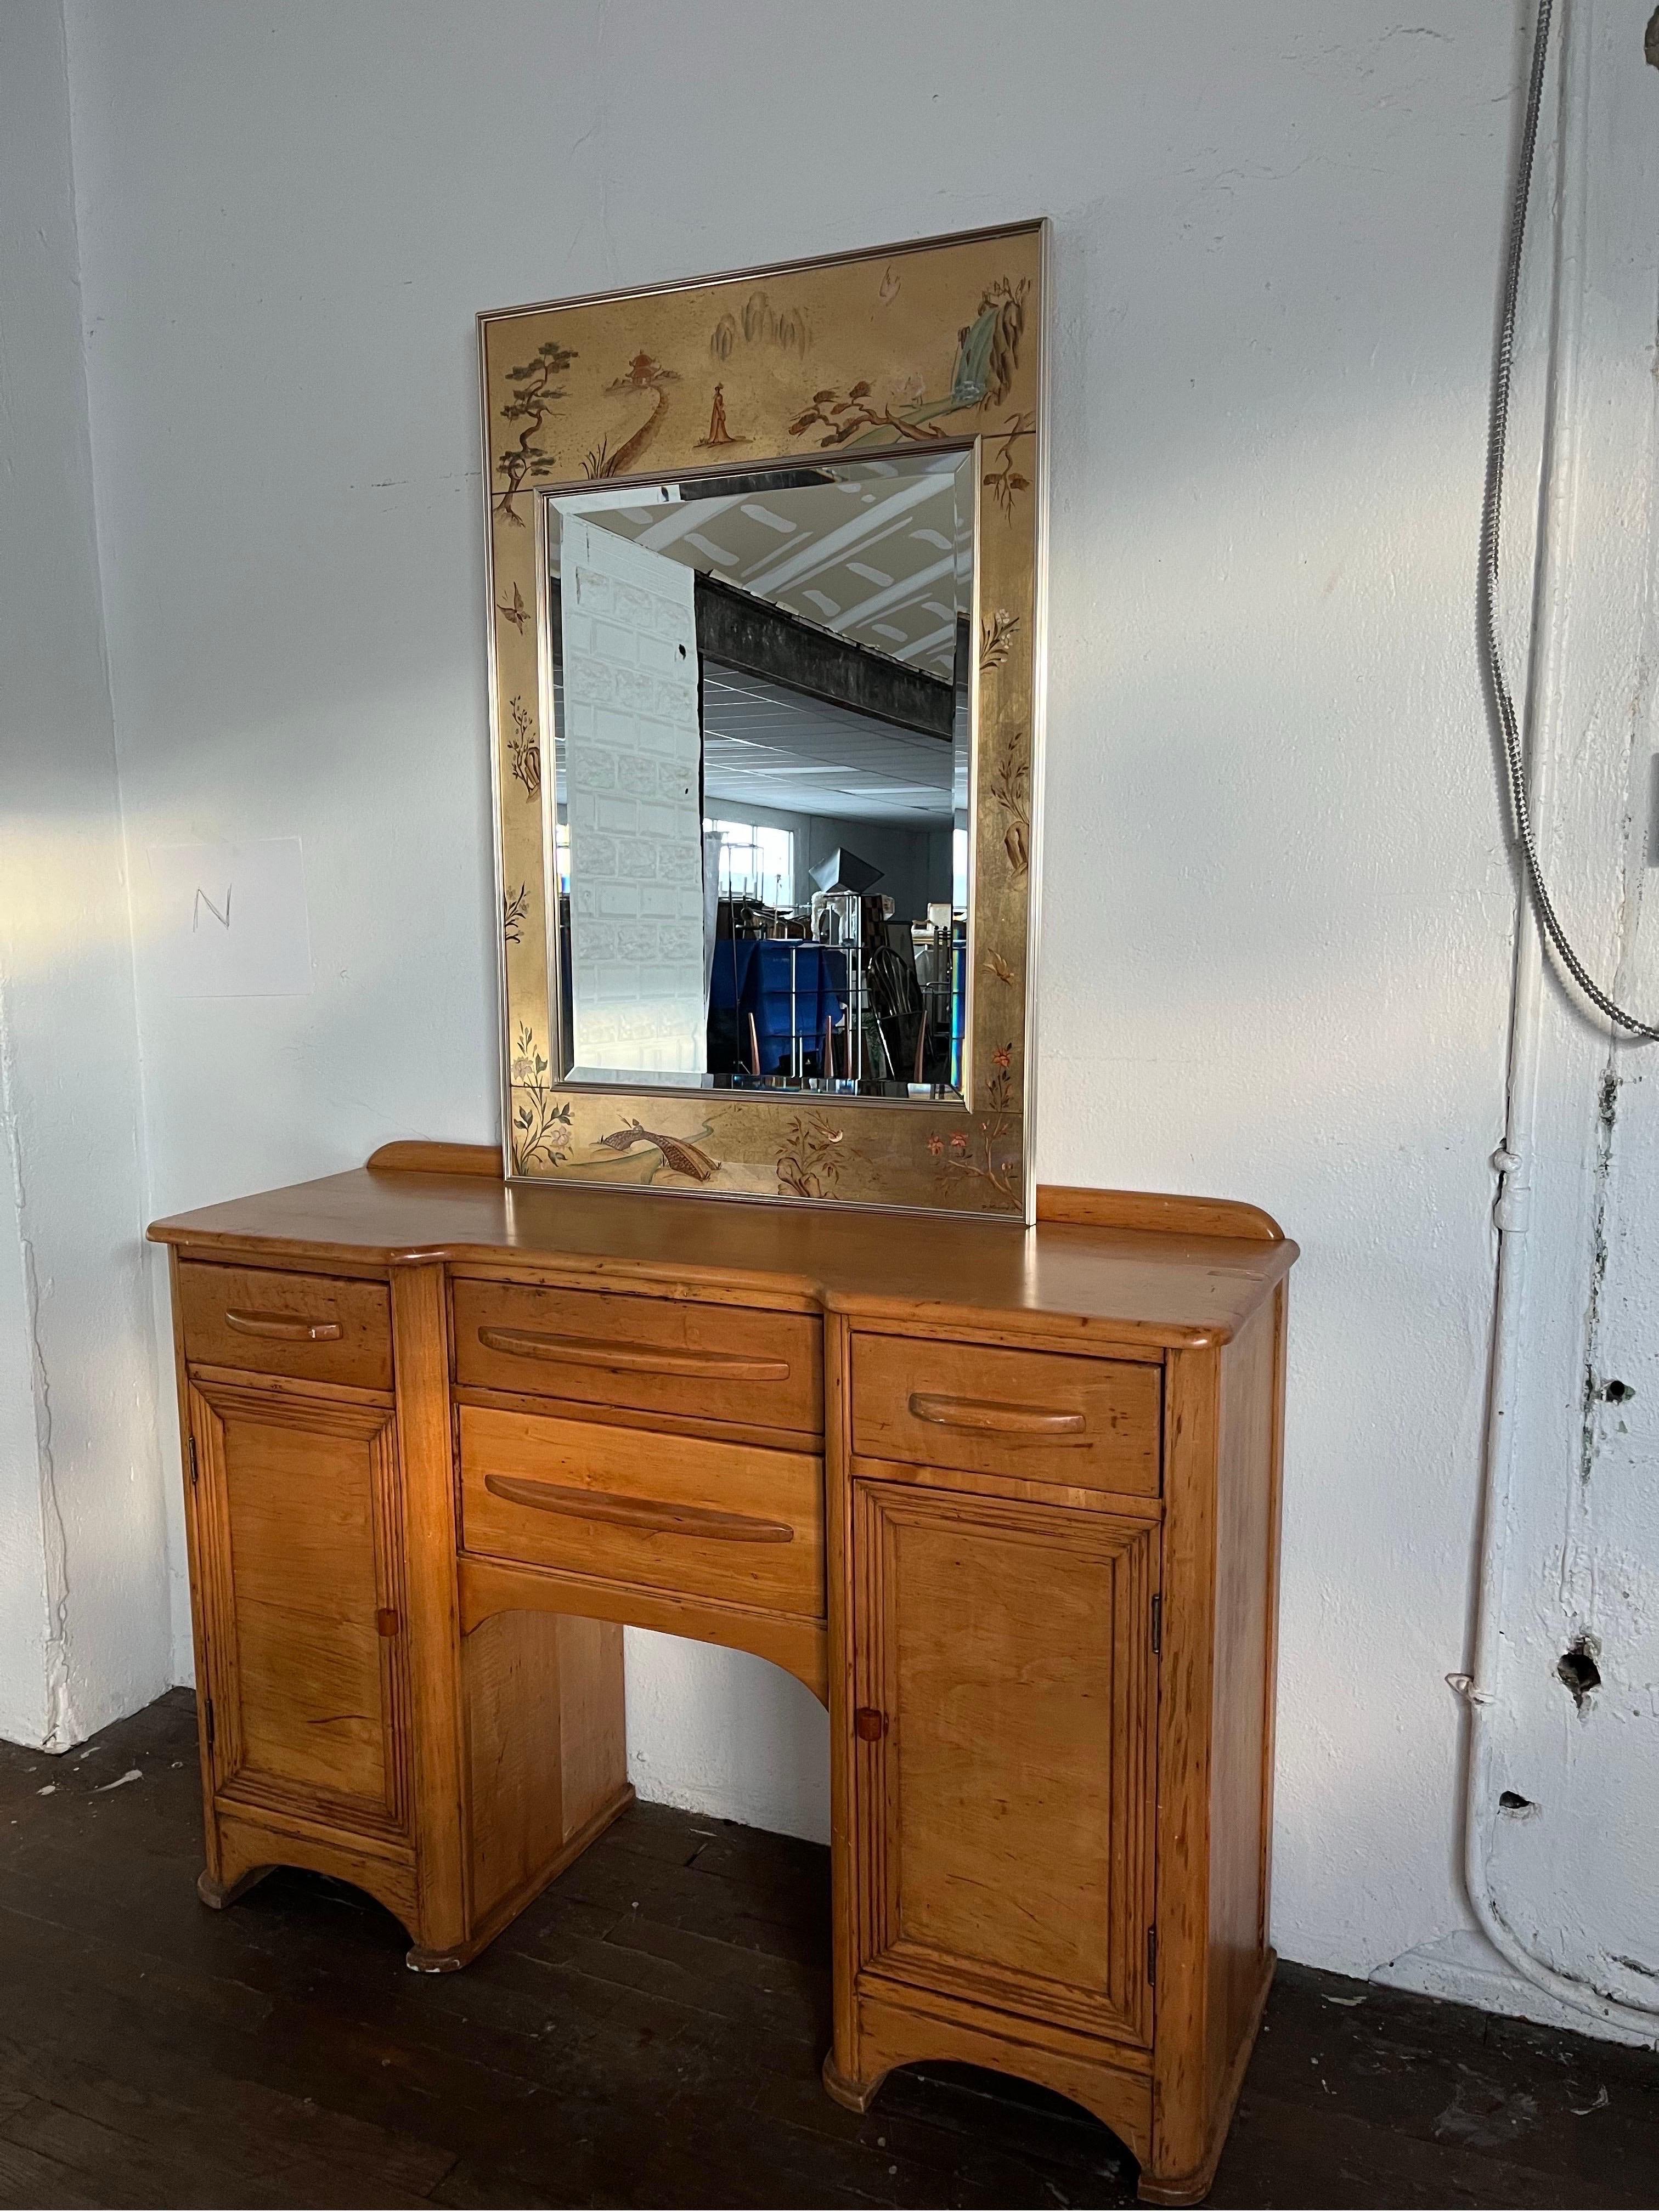 LaBarge Chinoiserie Handpainted & Signed Mirror In Good Condition For Sale In W Allenhurst, NJ